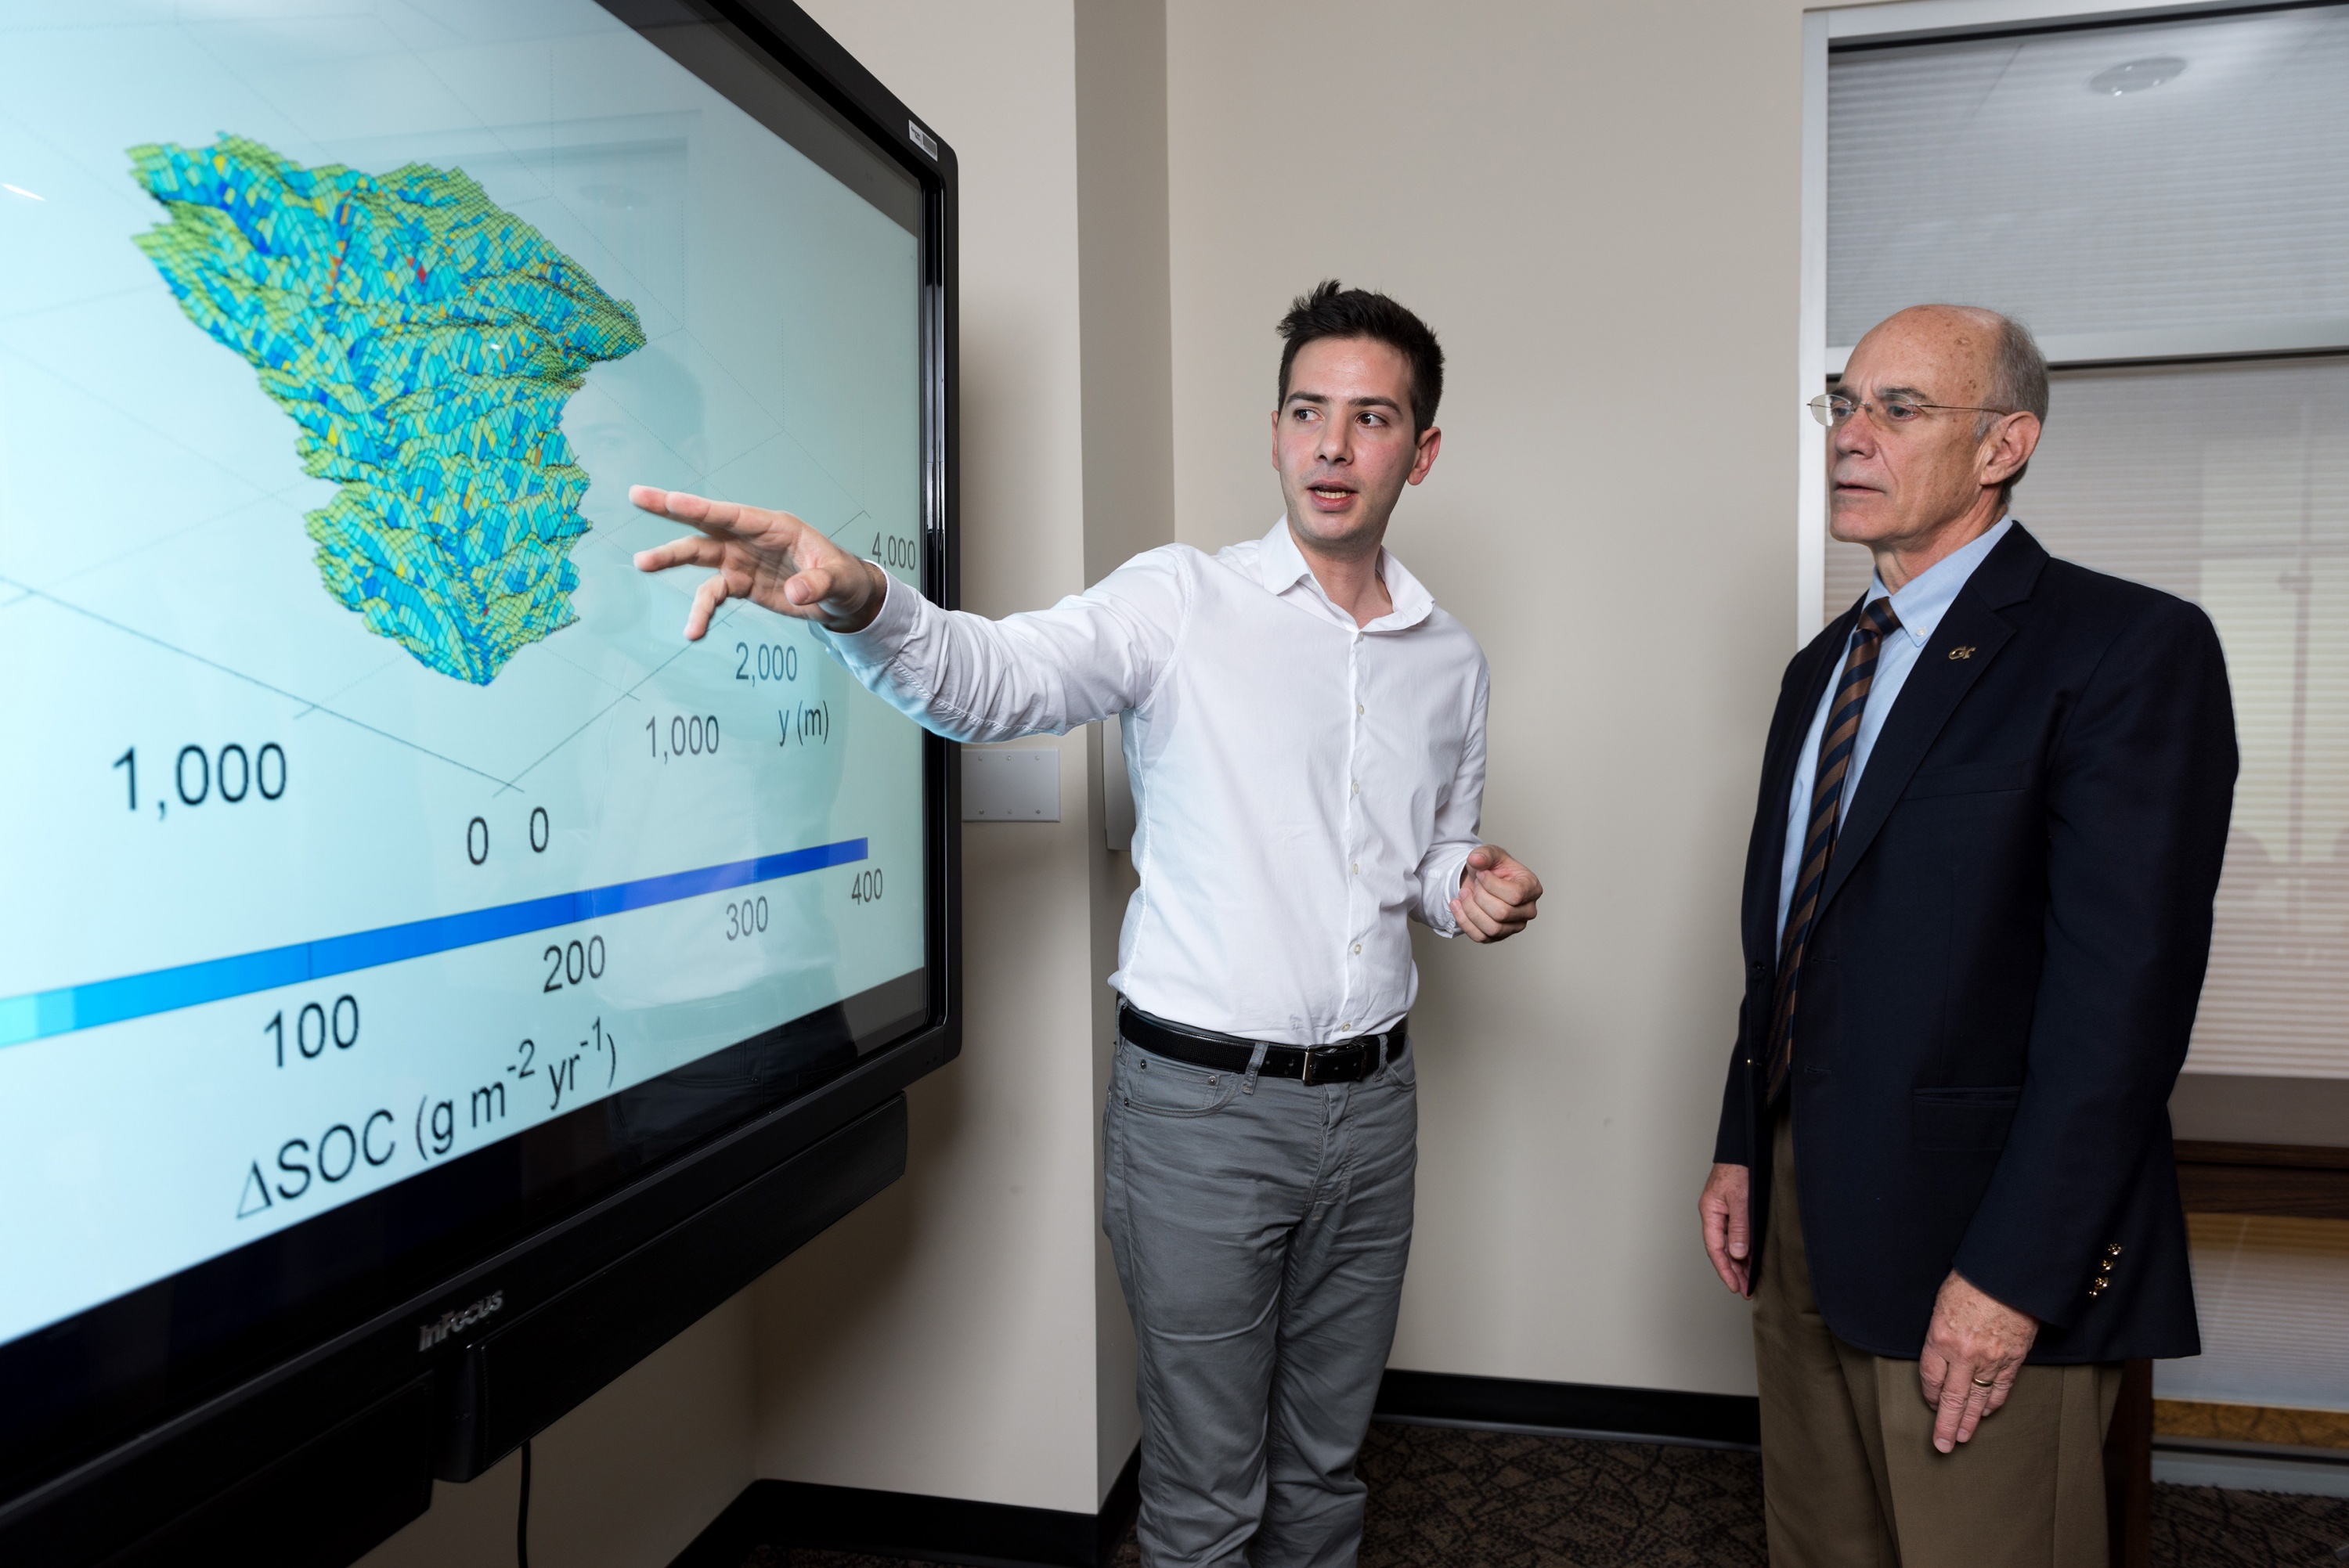 Yannis Dialynas, a hydrology Ph.D. student in Georgia Tech’s School of Civil and Environmental Engineering, and Georgia Tech Provost Rafael L. Bras, discuss a model of soil erosion. This research is studying the role of erosion on carbon cycling. (Credit: Rob Felt, Georgia Tech)